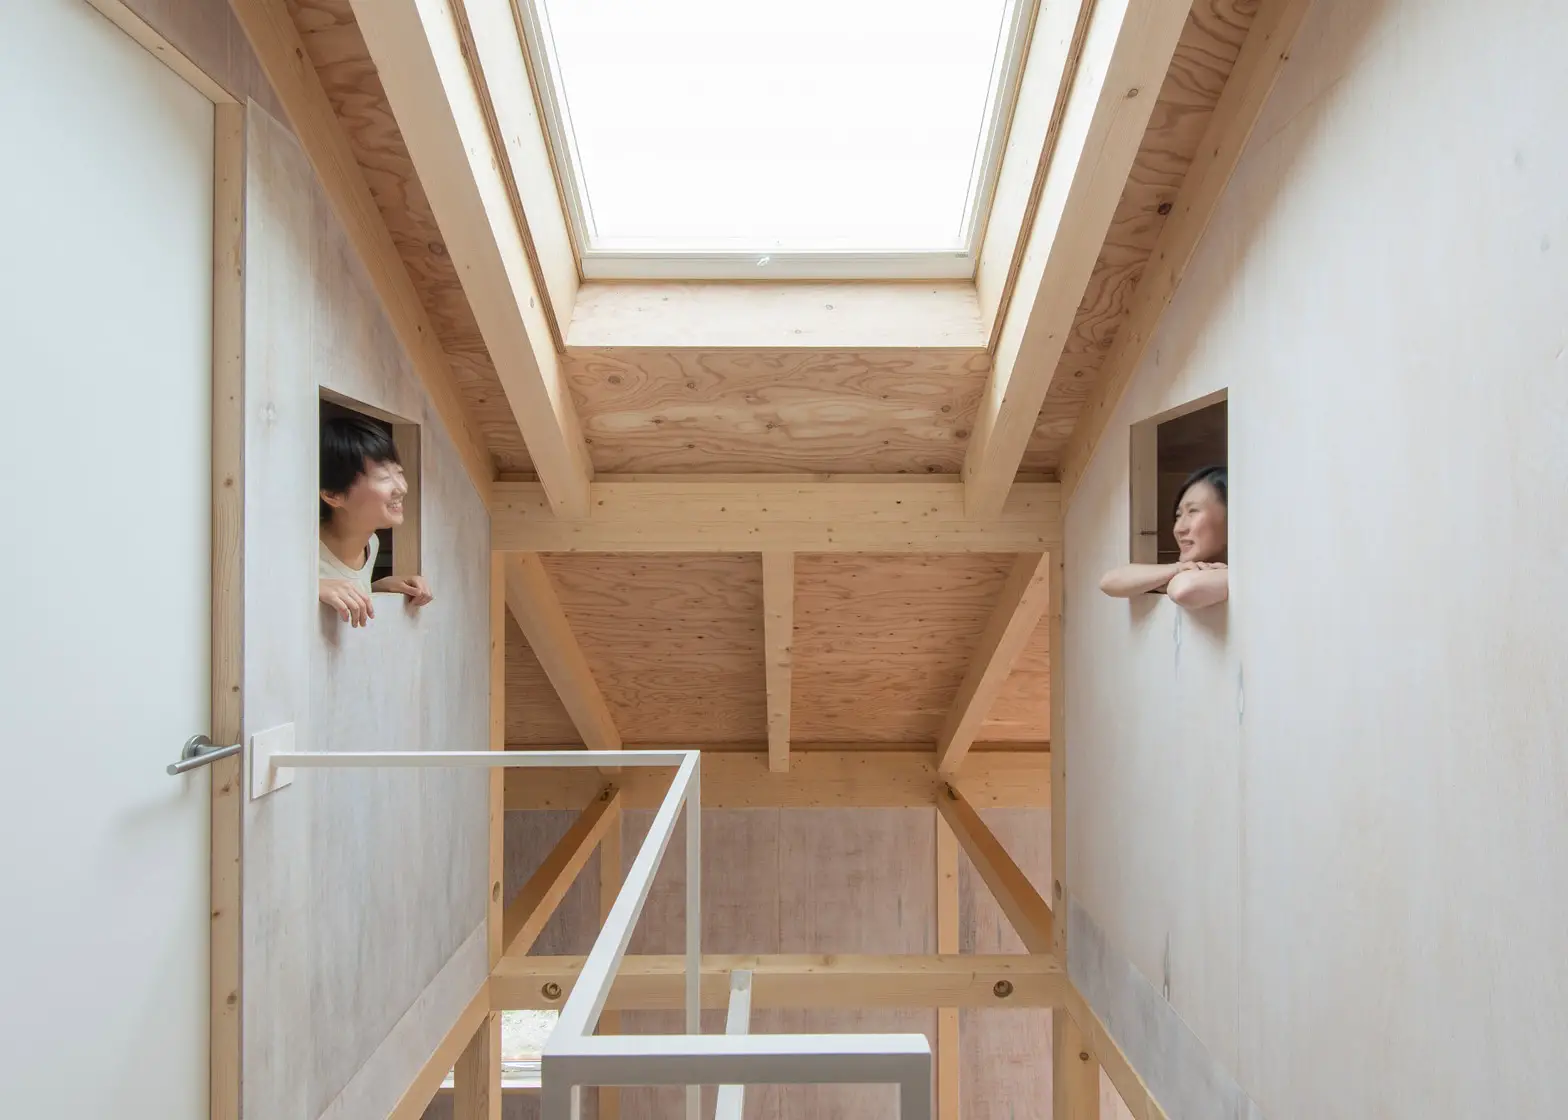 The timber and polycarbonate house in Japan